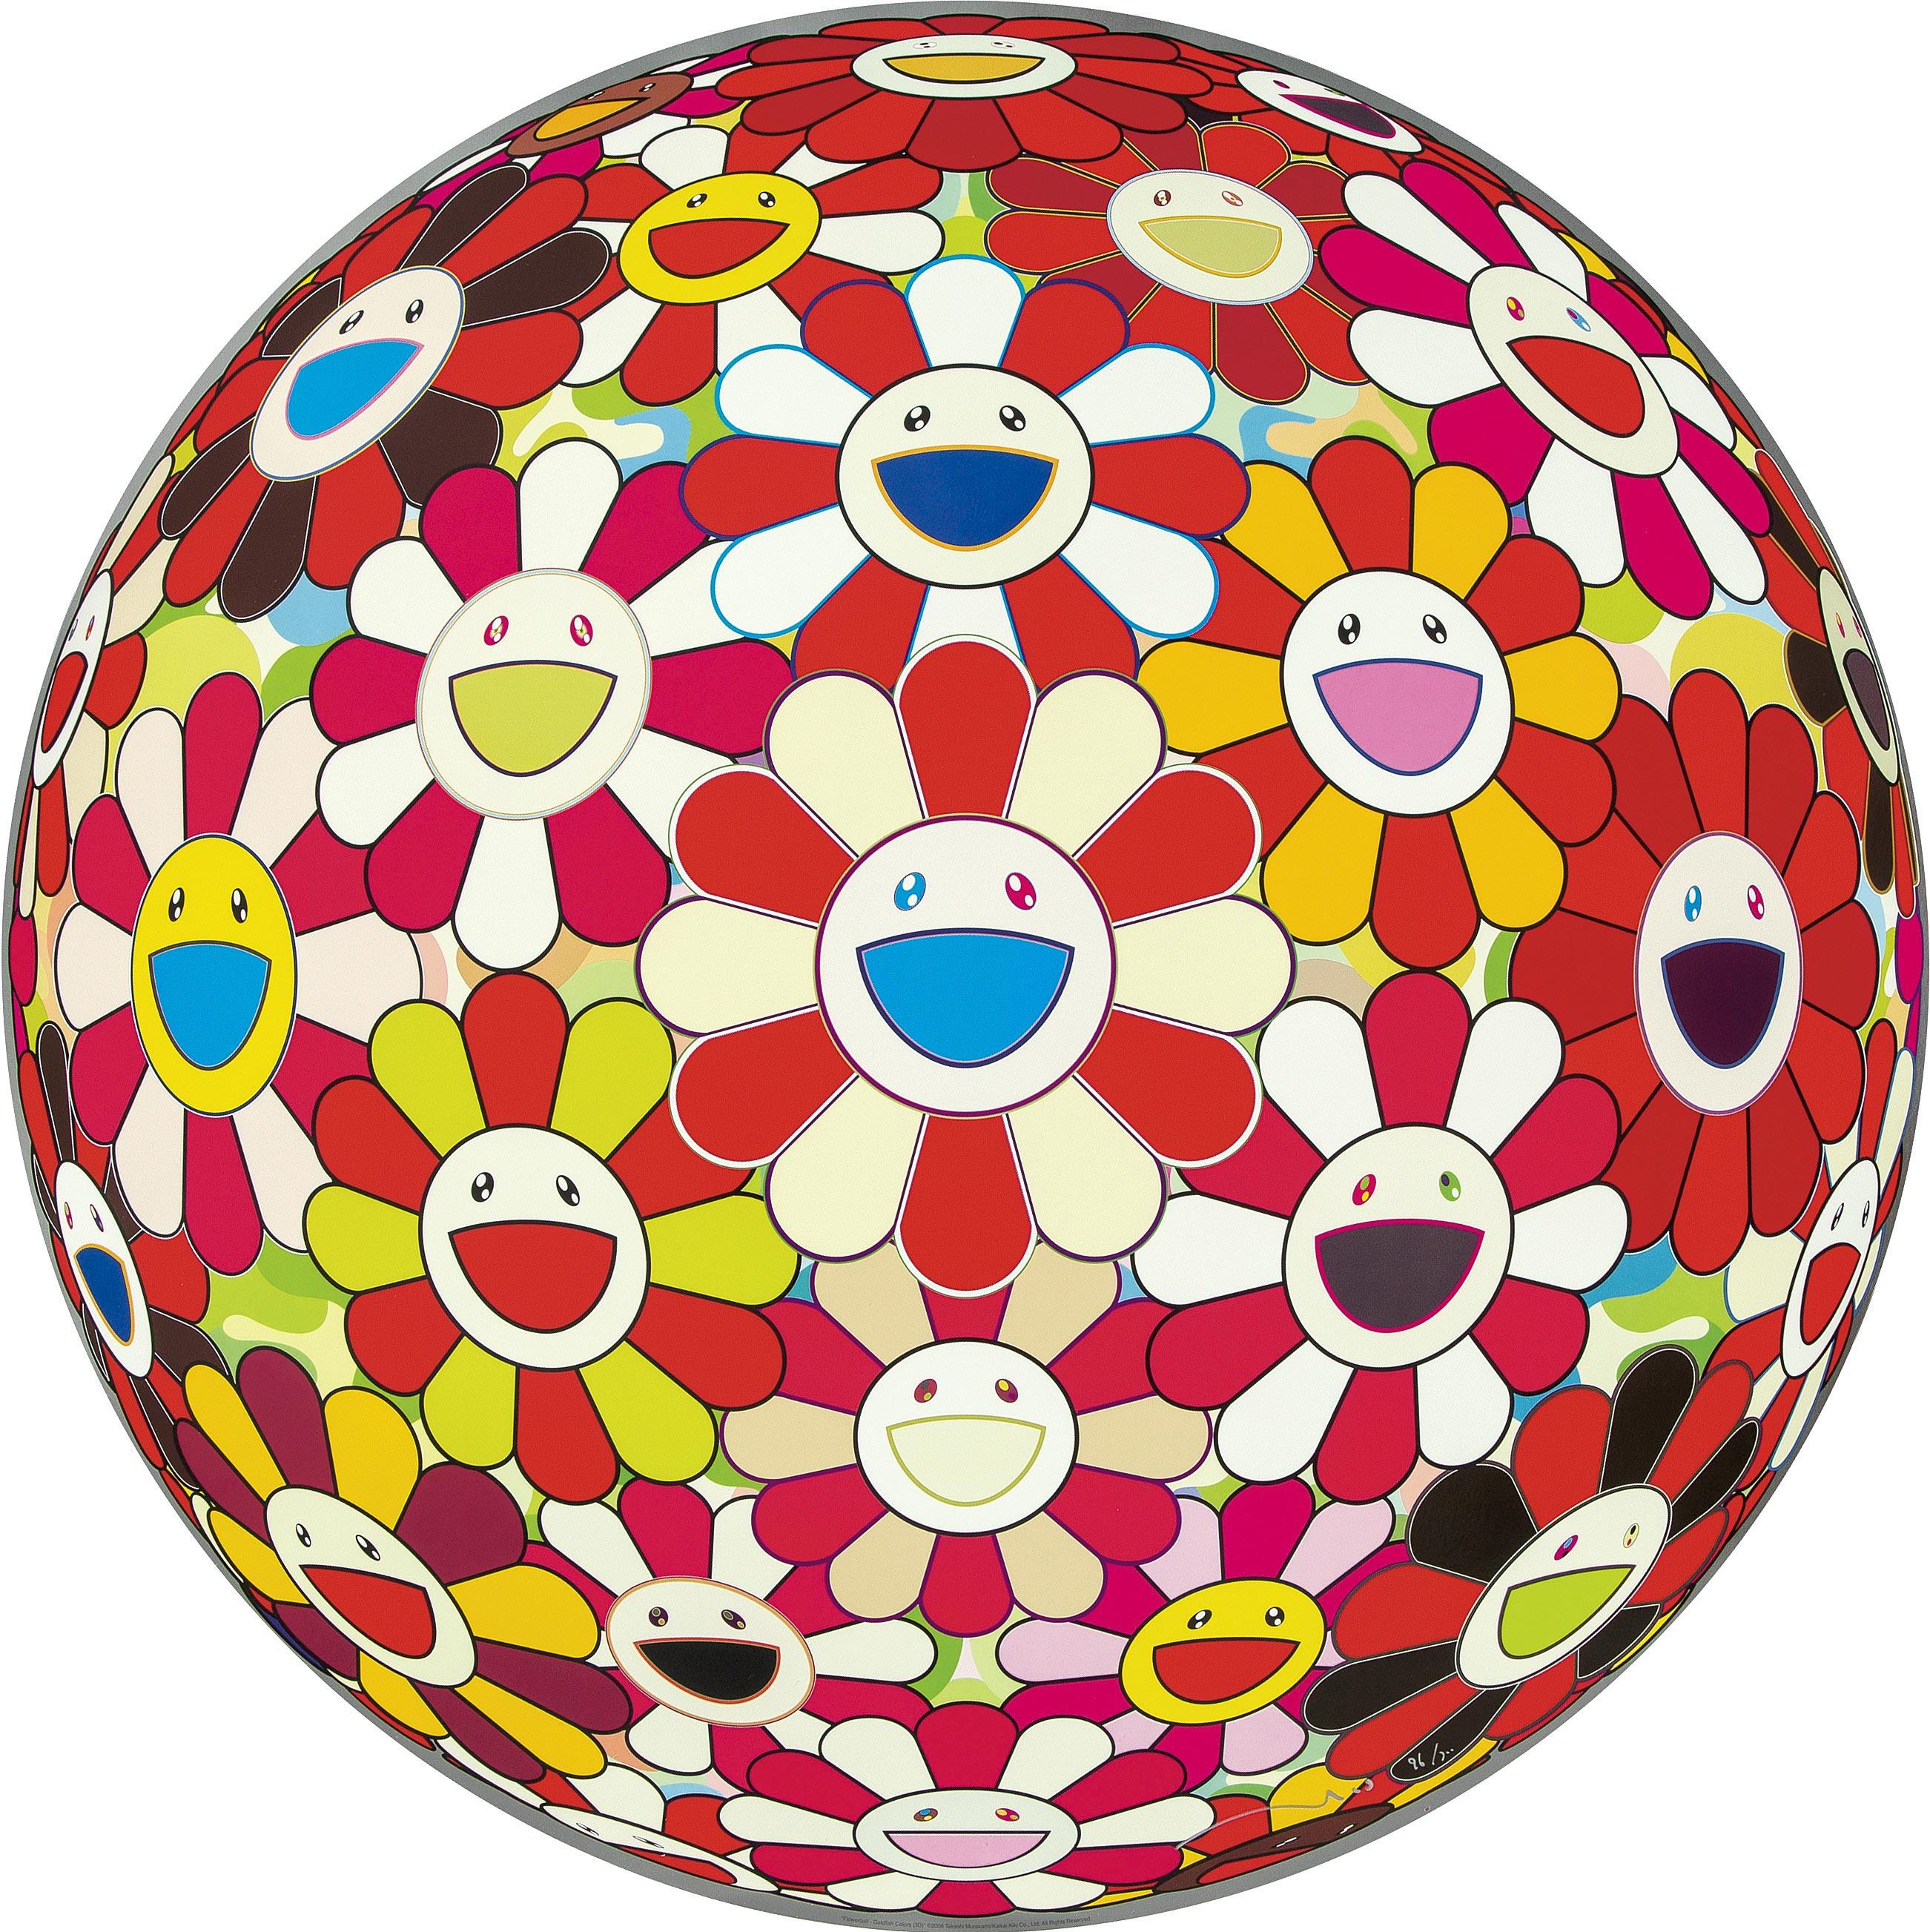 Takashi Murakami Figurative Print - Flower Ball-Goldfish Colors (3D). Limited Edition by Murakami signed, numbered